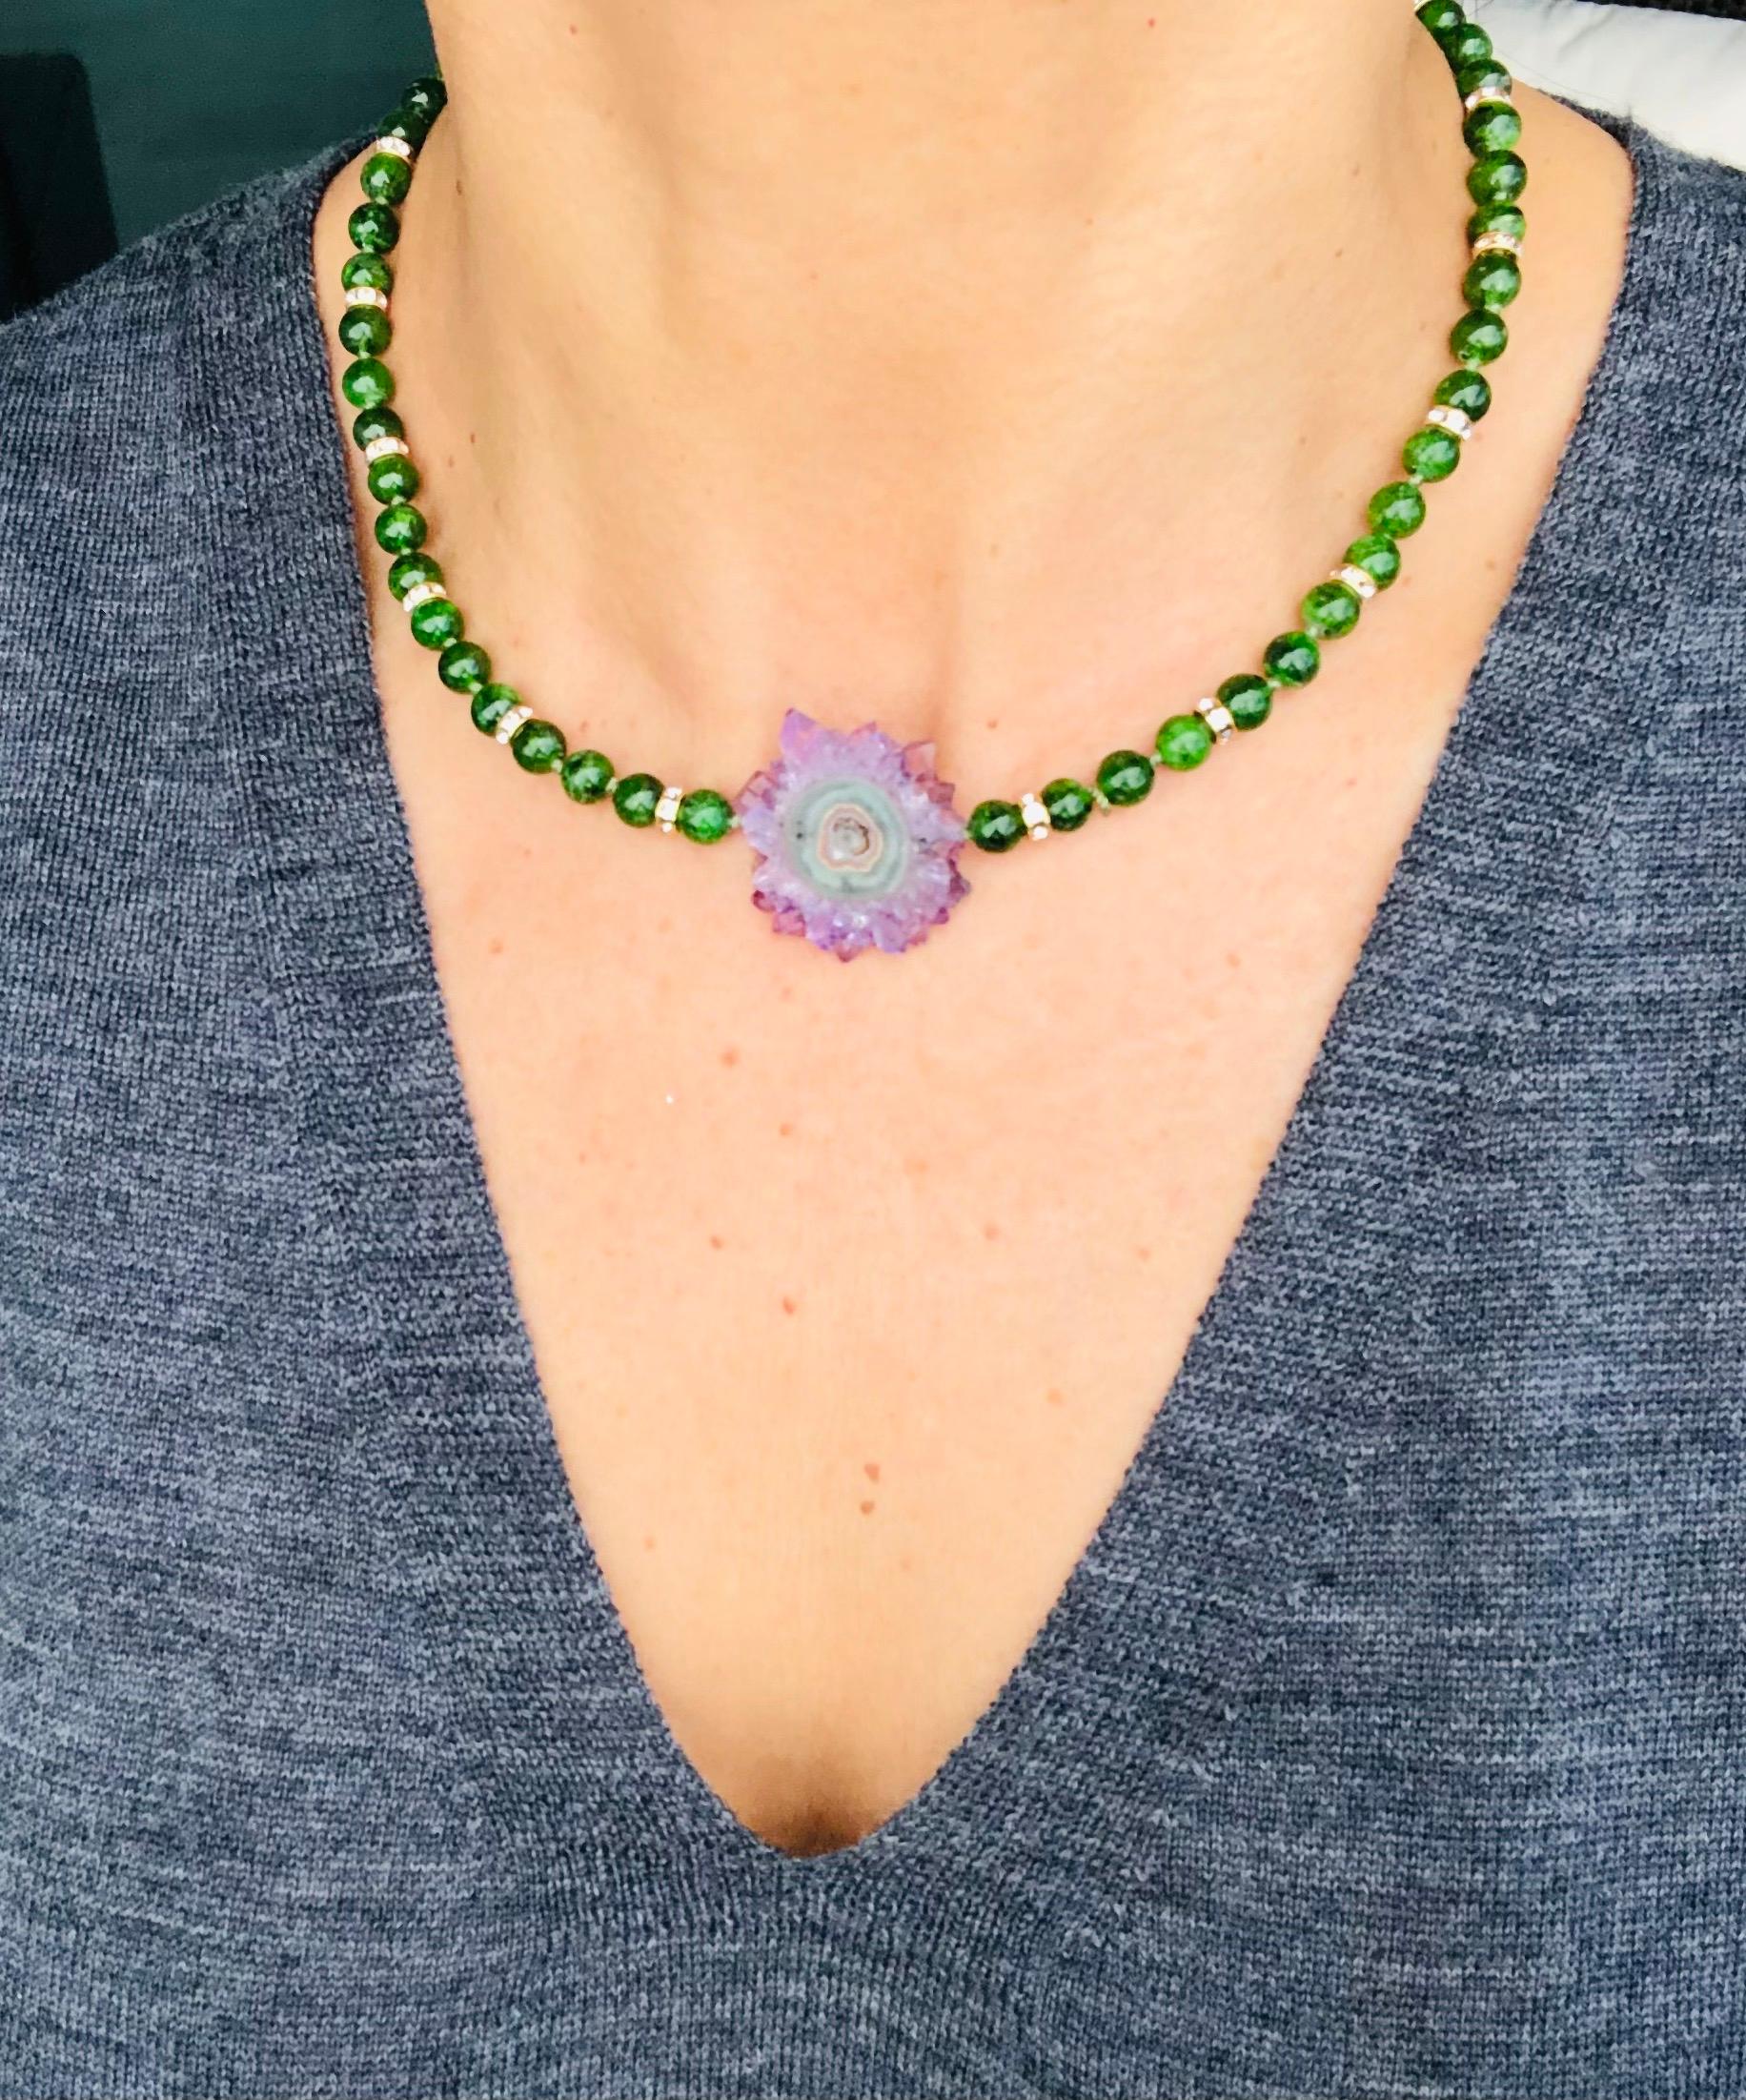 One-of-a-Kind
If you're looking for a statement piece that combines exotic beauty with natural wonder, look no further than this stunning necklace featuring Chrome Diopside polished beads and an Amethyst Stalactite.
Chrome Diopside is a rare and